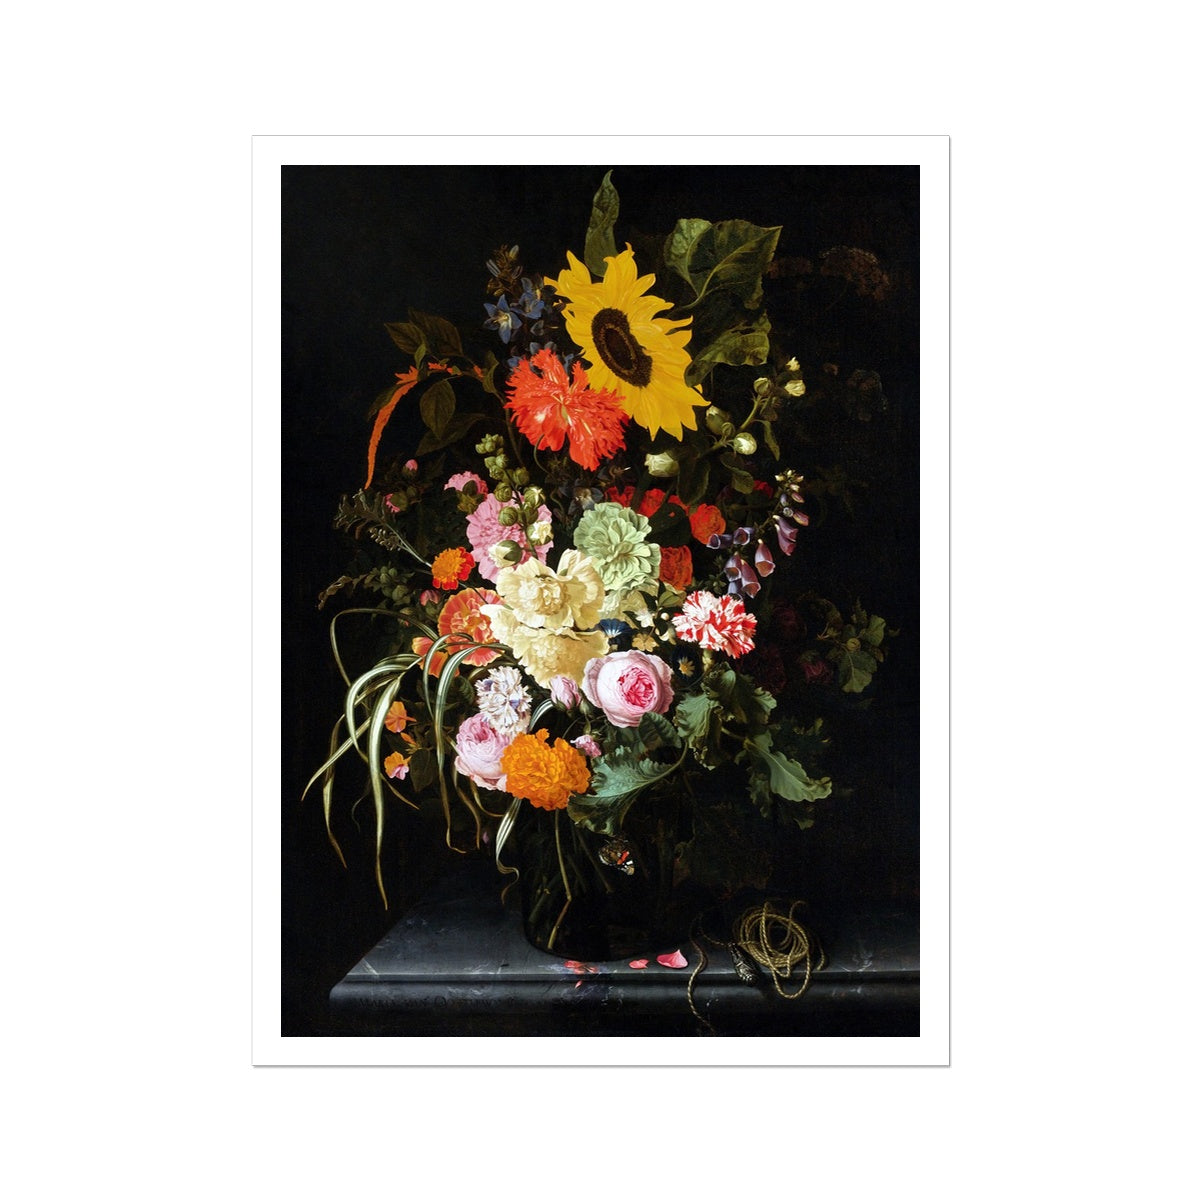 'Roses, Carnation, Marigolds and other Flowers with a Sunflower and Striped Grass'. Still Life by Maria van Oosterwijck. Open Edition Fine Art Print. Historic Art